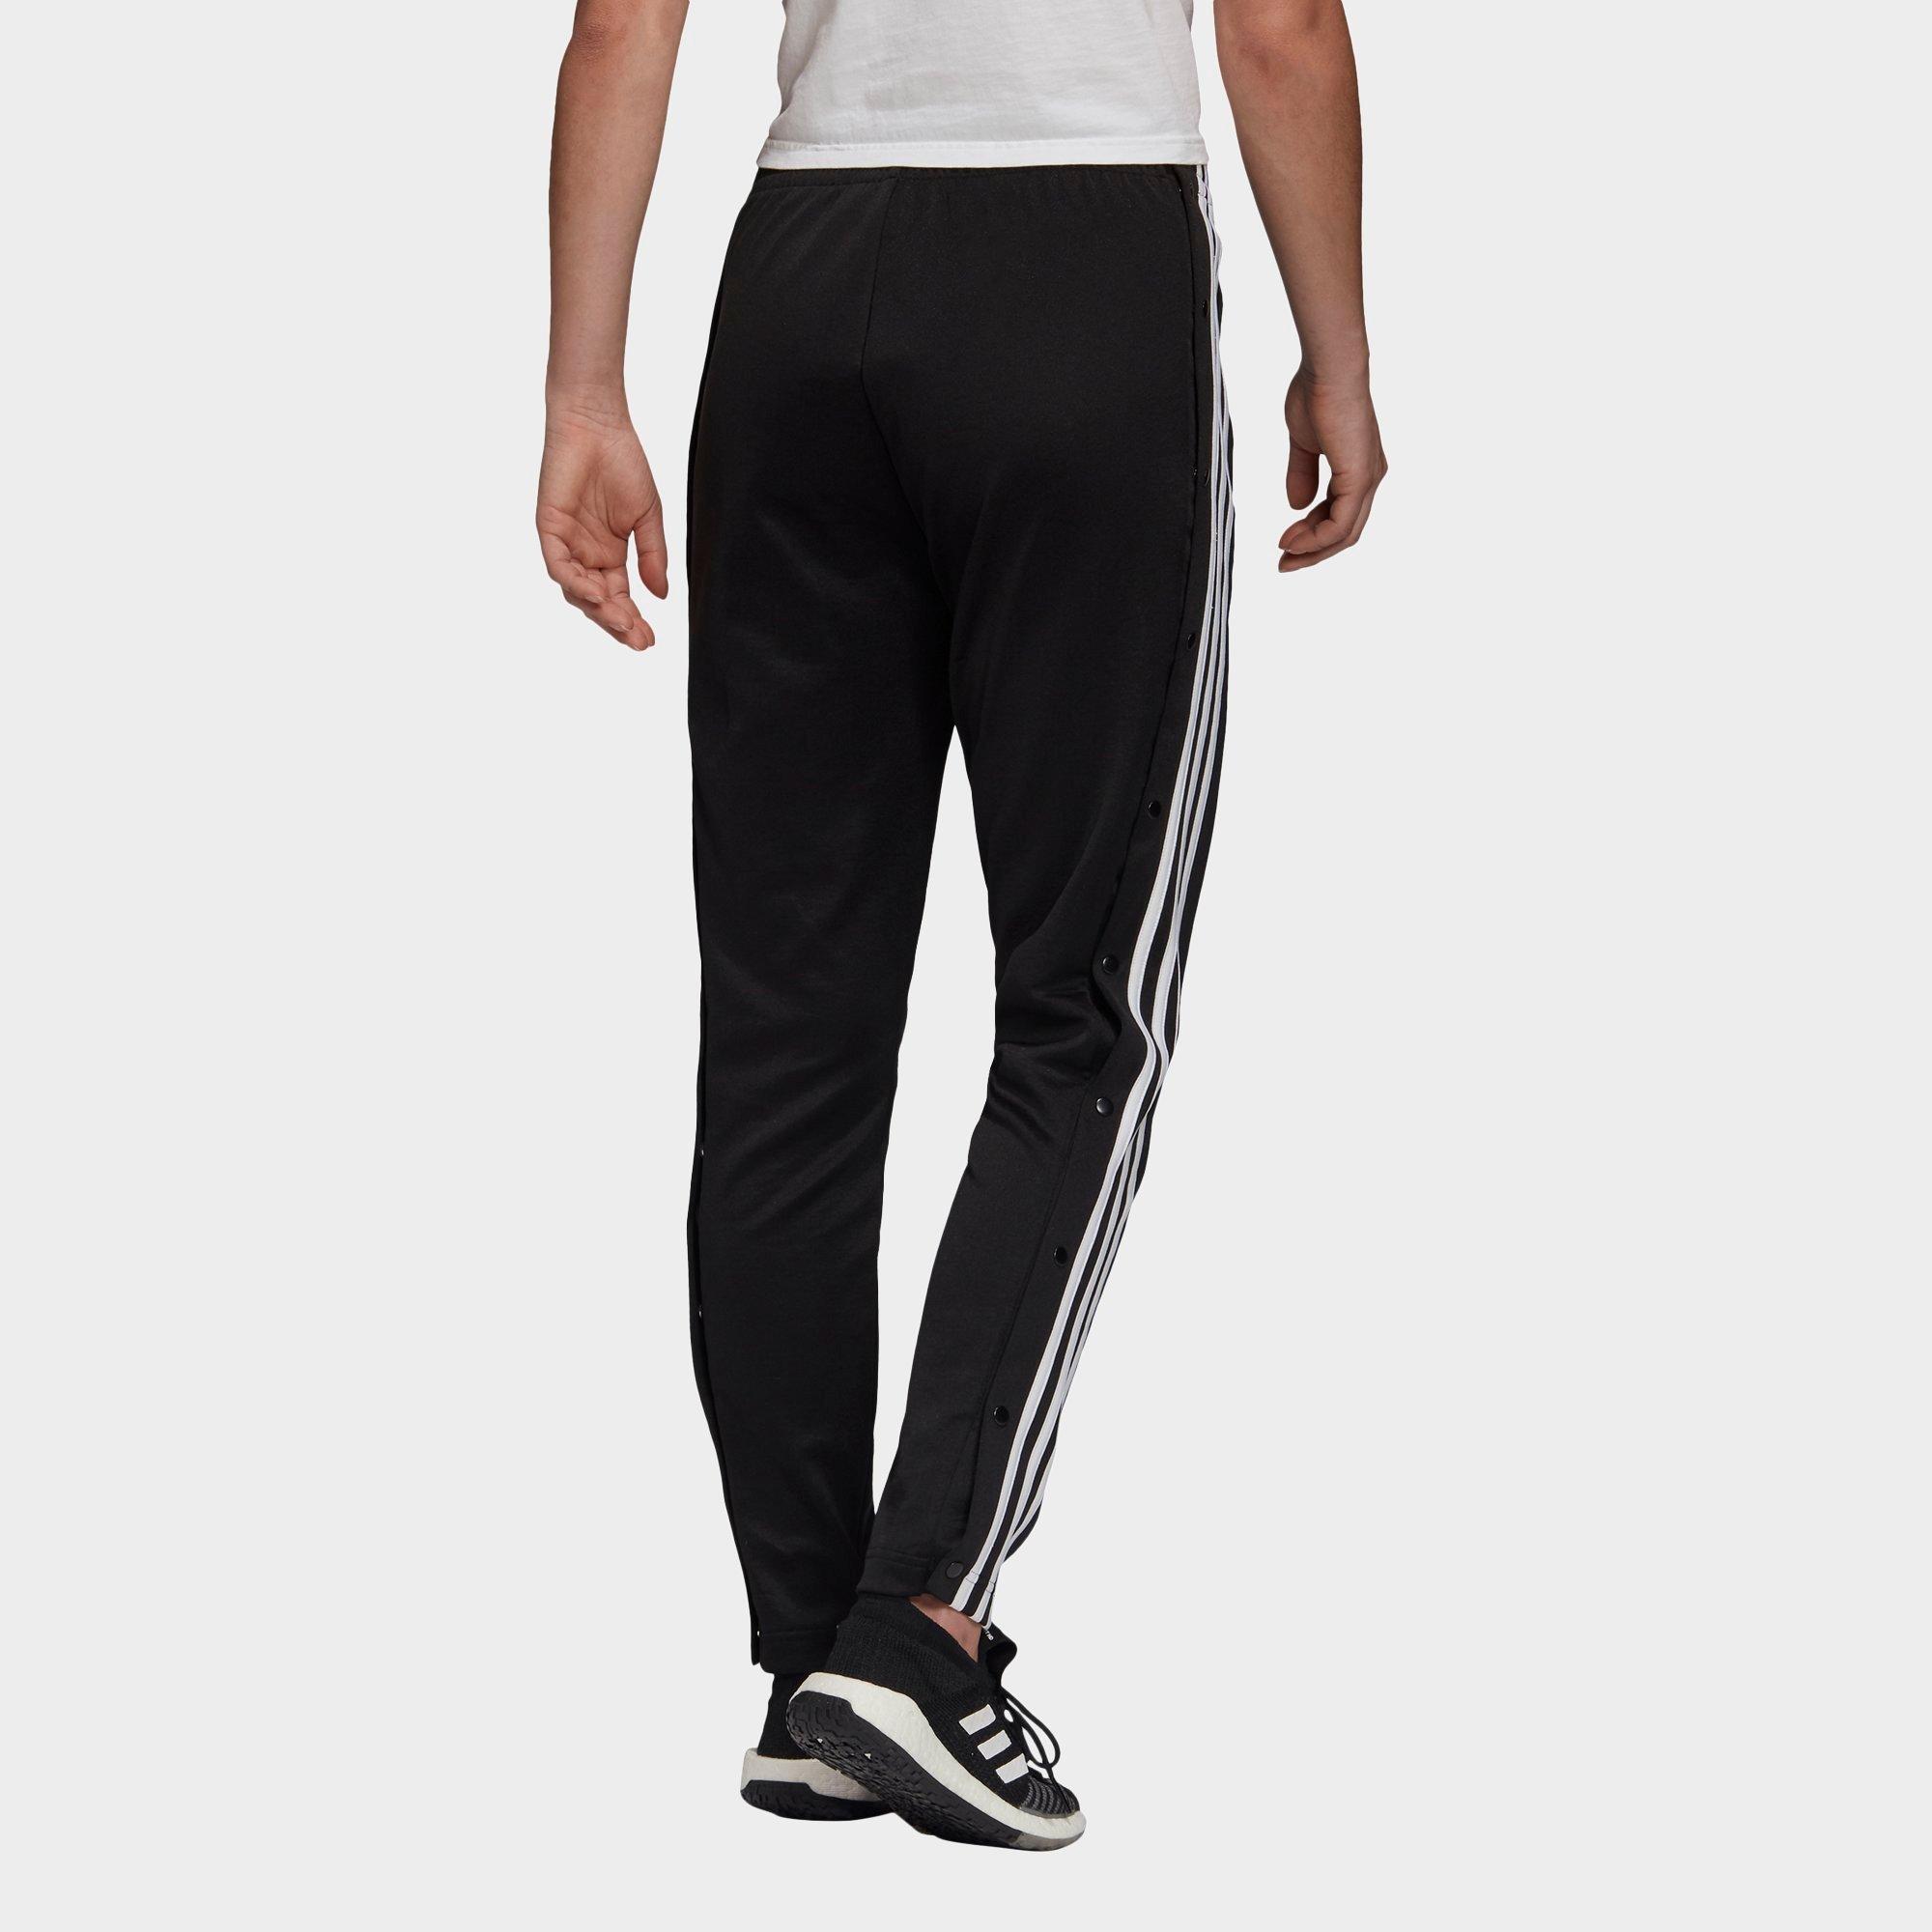 adidas track pants with snaps